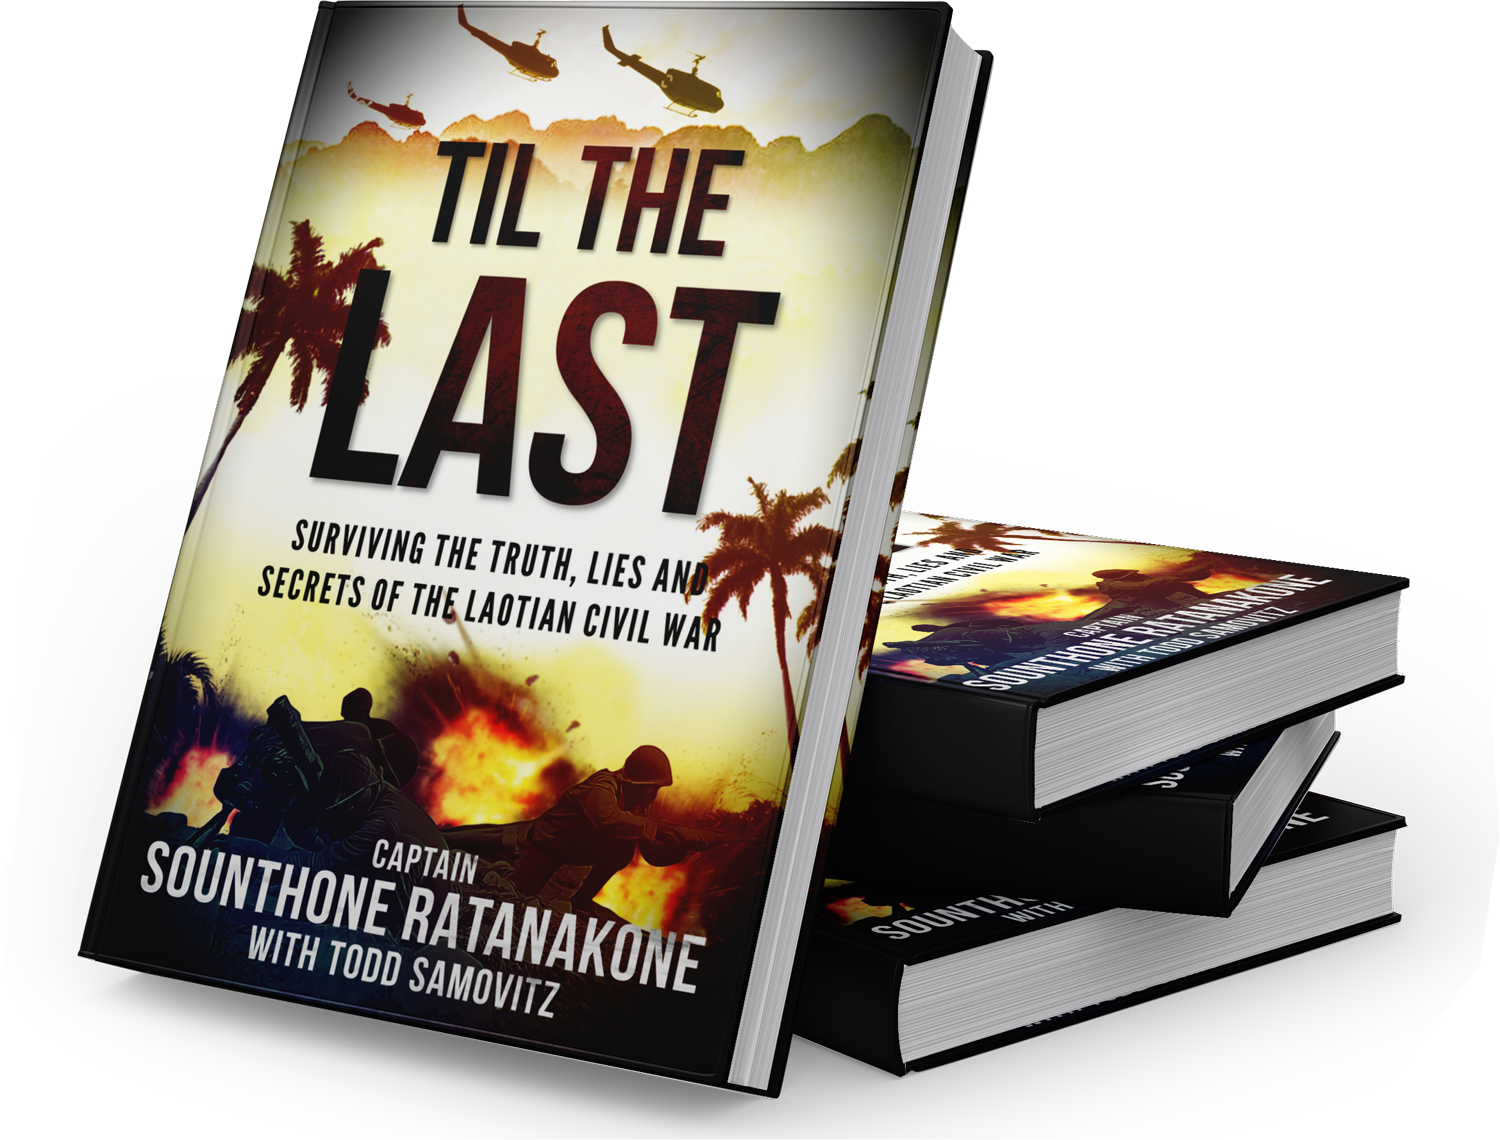 Til The Last: Surviving the Truth, Lies and Secrets of the Laotian Civil War Hardcover Book Signed Copy